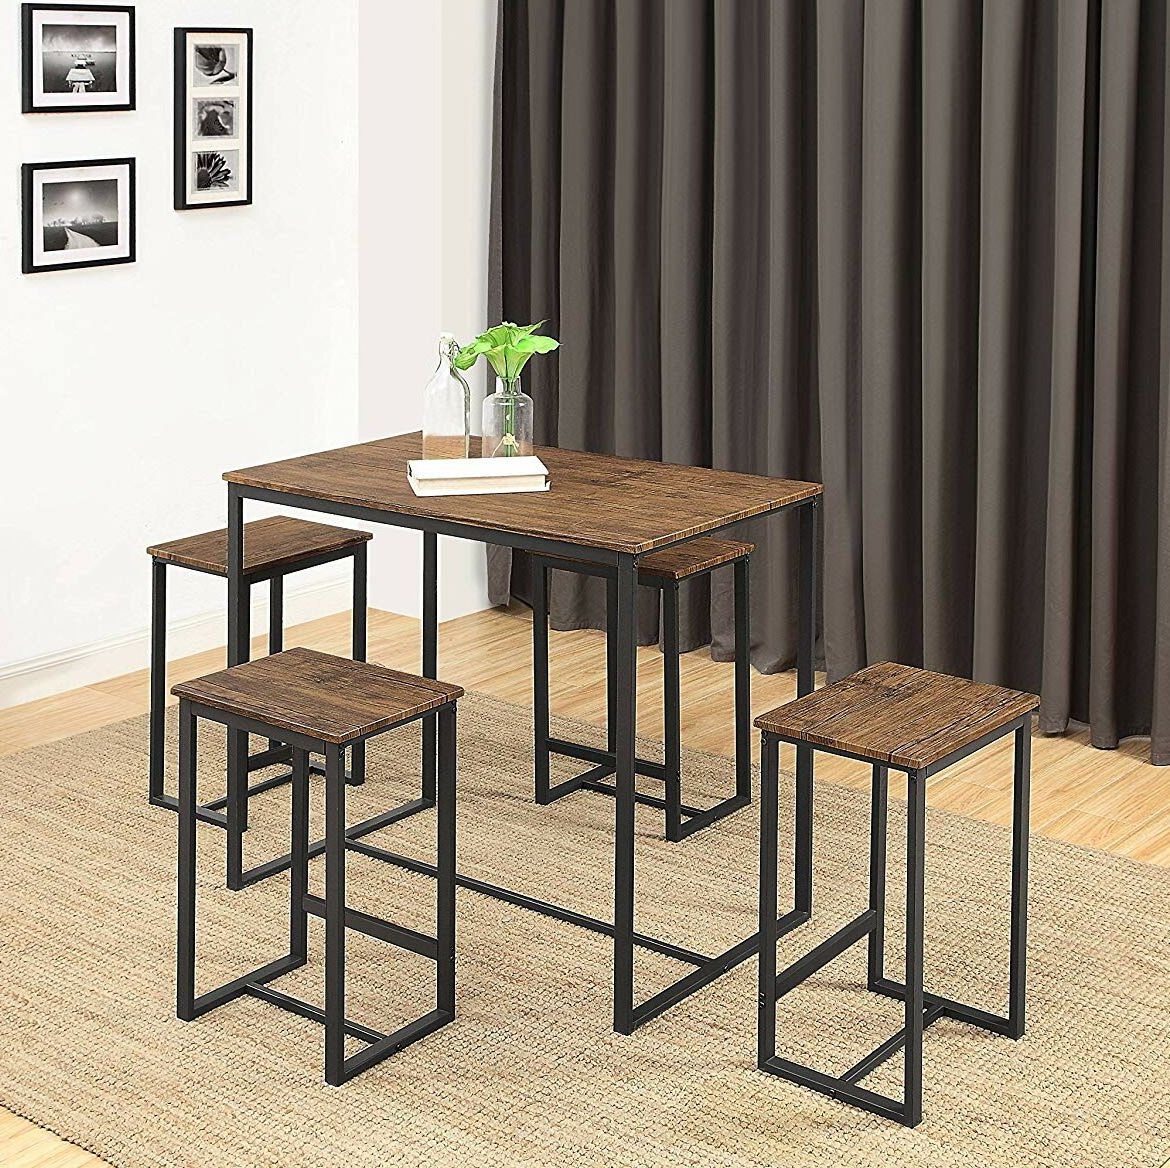 Fashionable Saintcroix 3 Piece Dining Sets For Delmar 5 Piece Dining Set (View 6 of 20)